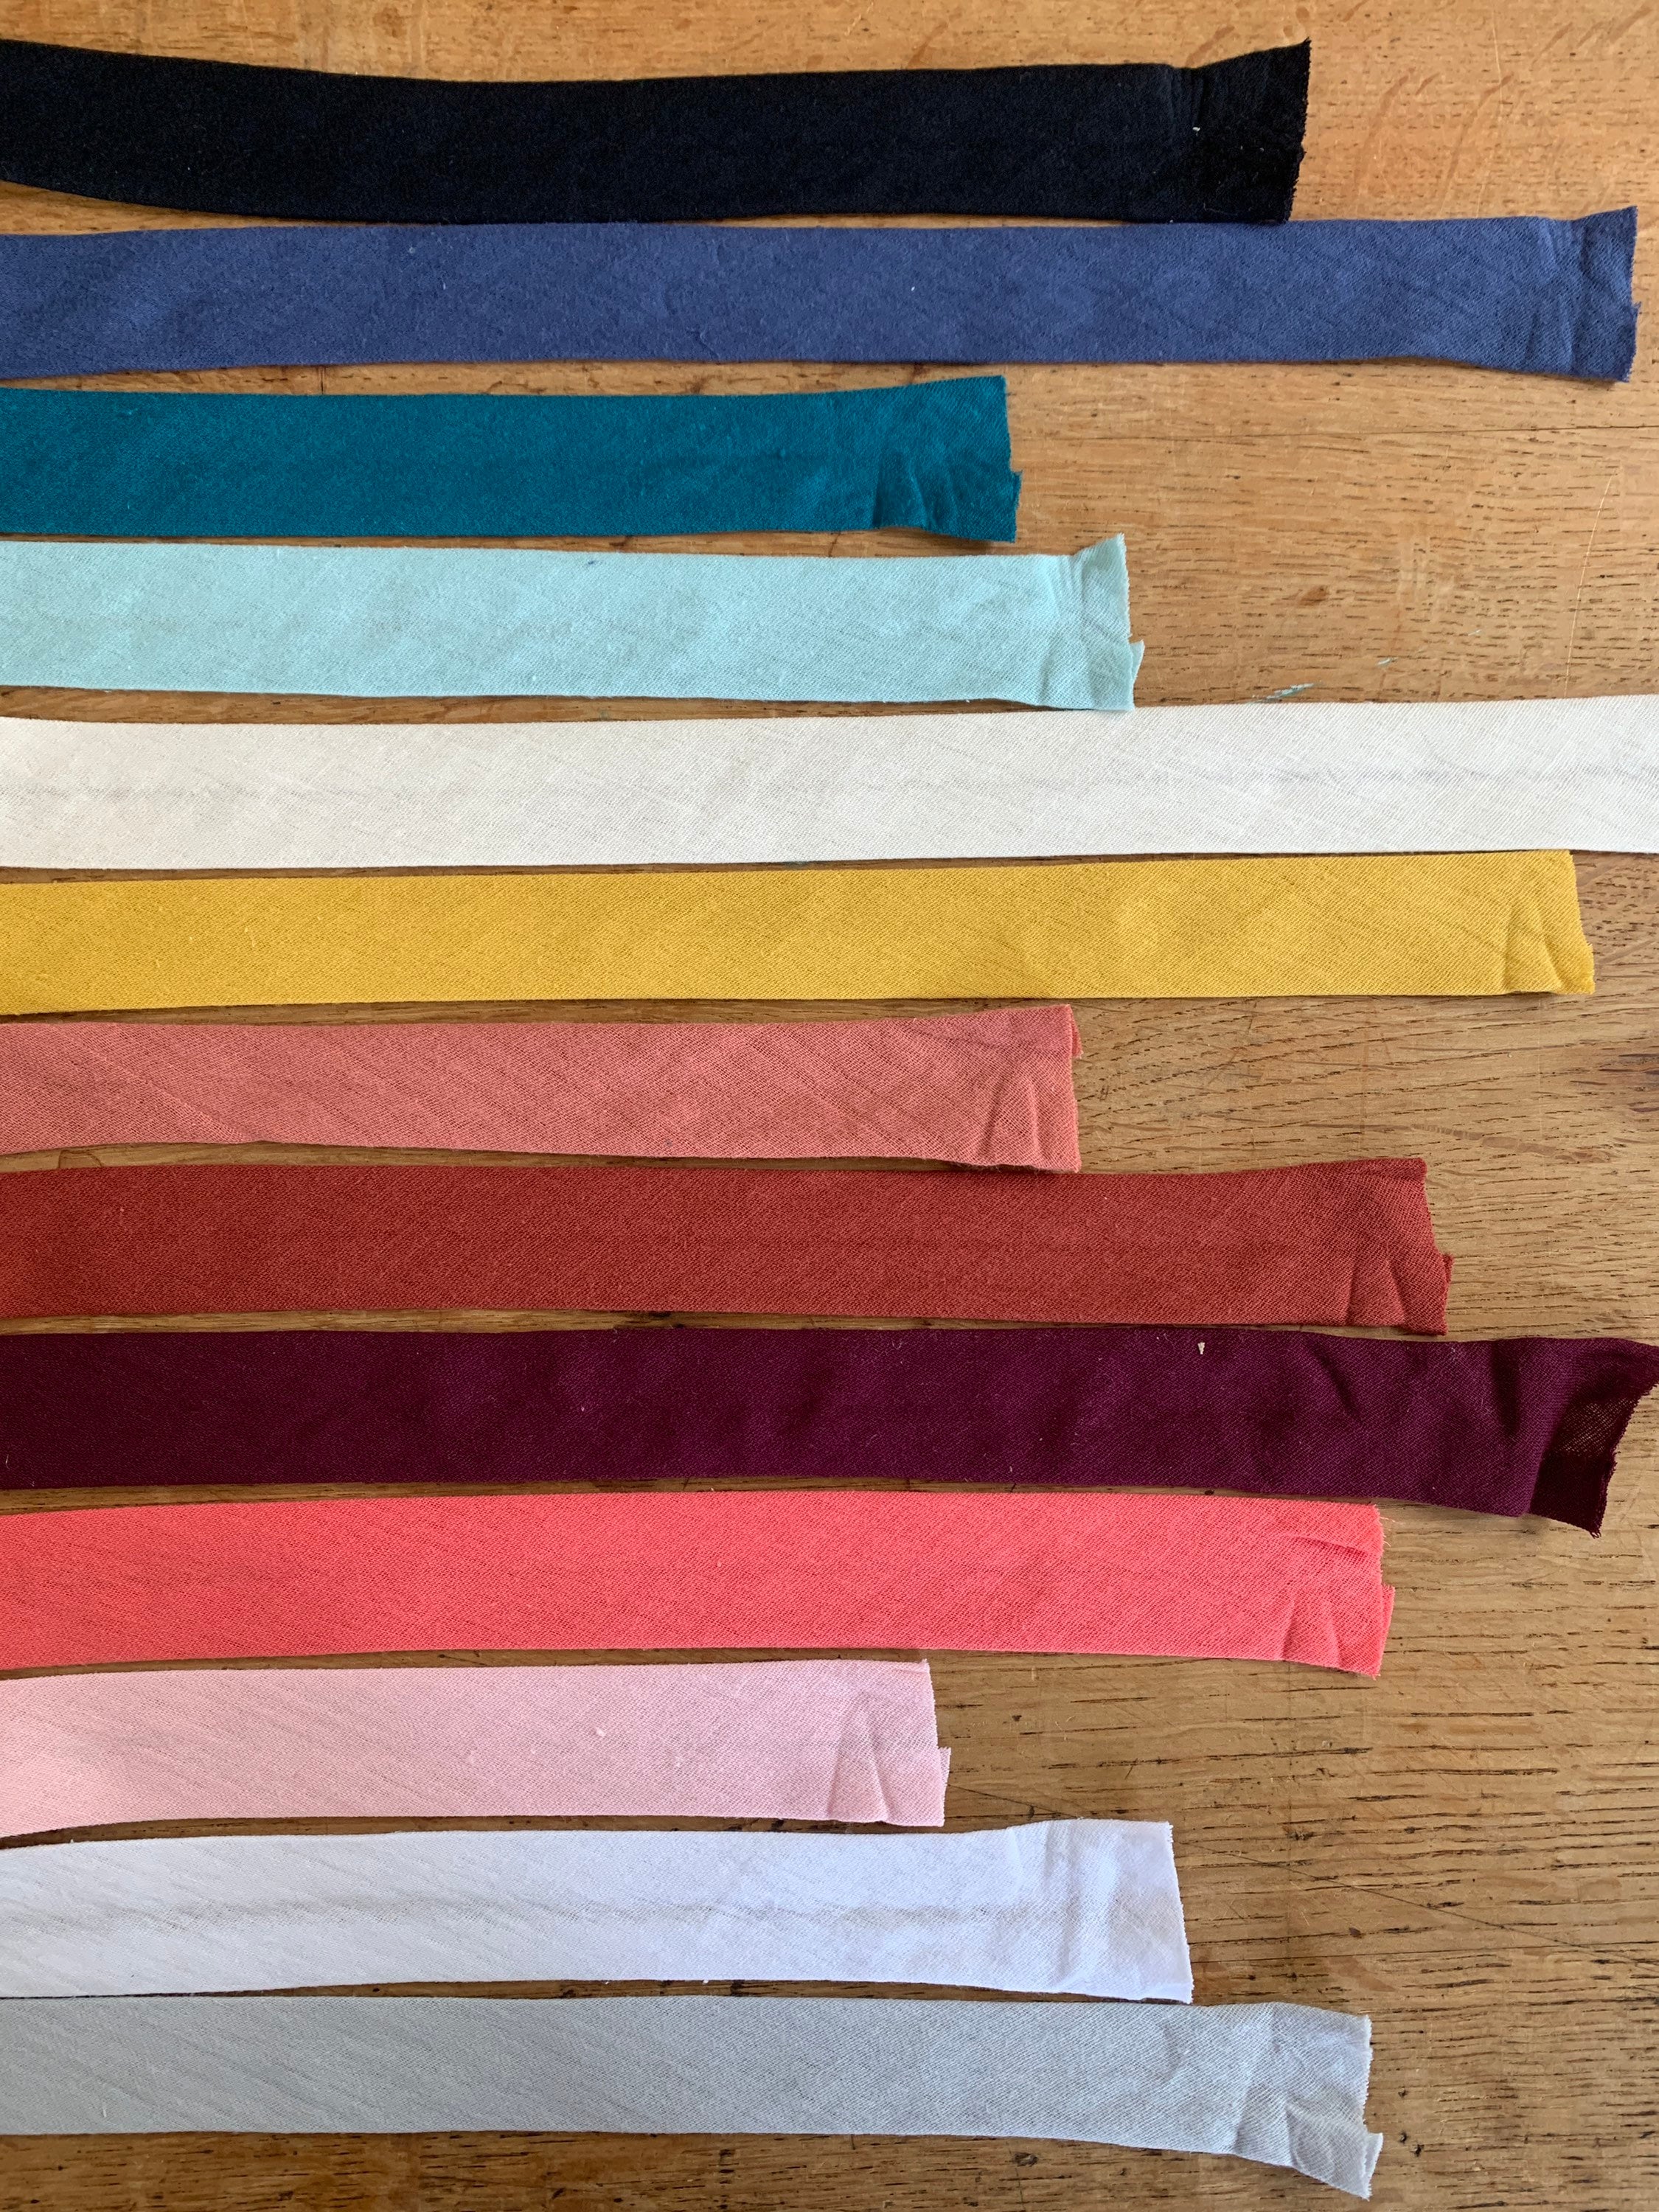 Bond Narrow Fabrics has the line of Twill tapes & more to fit your needs